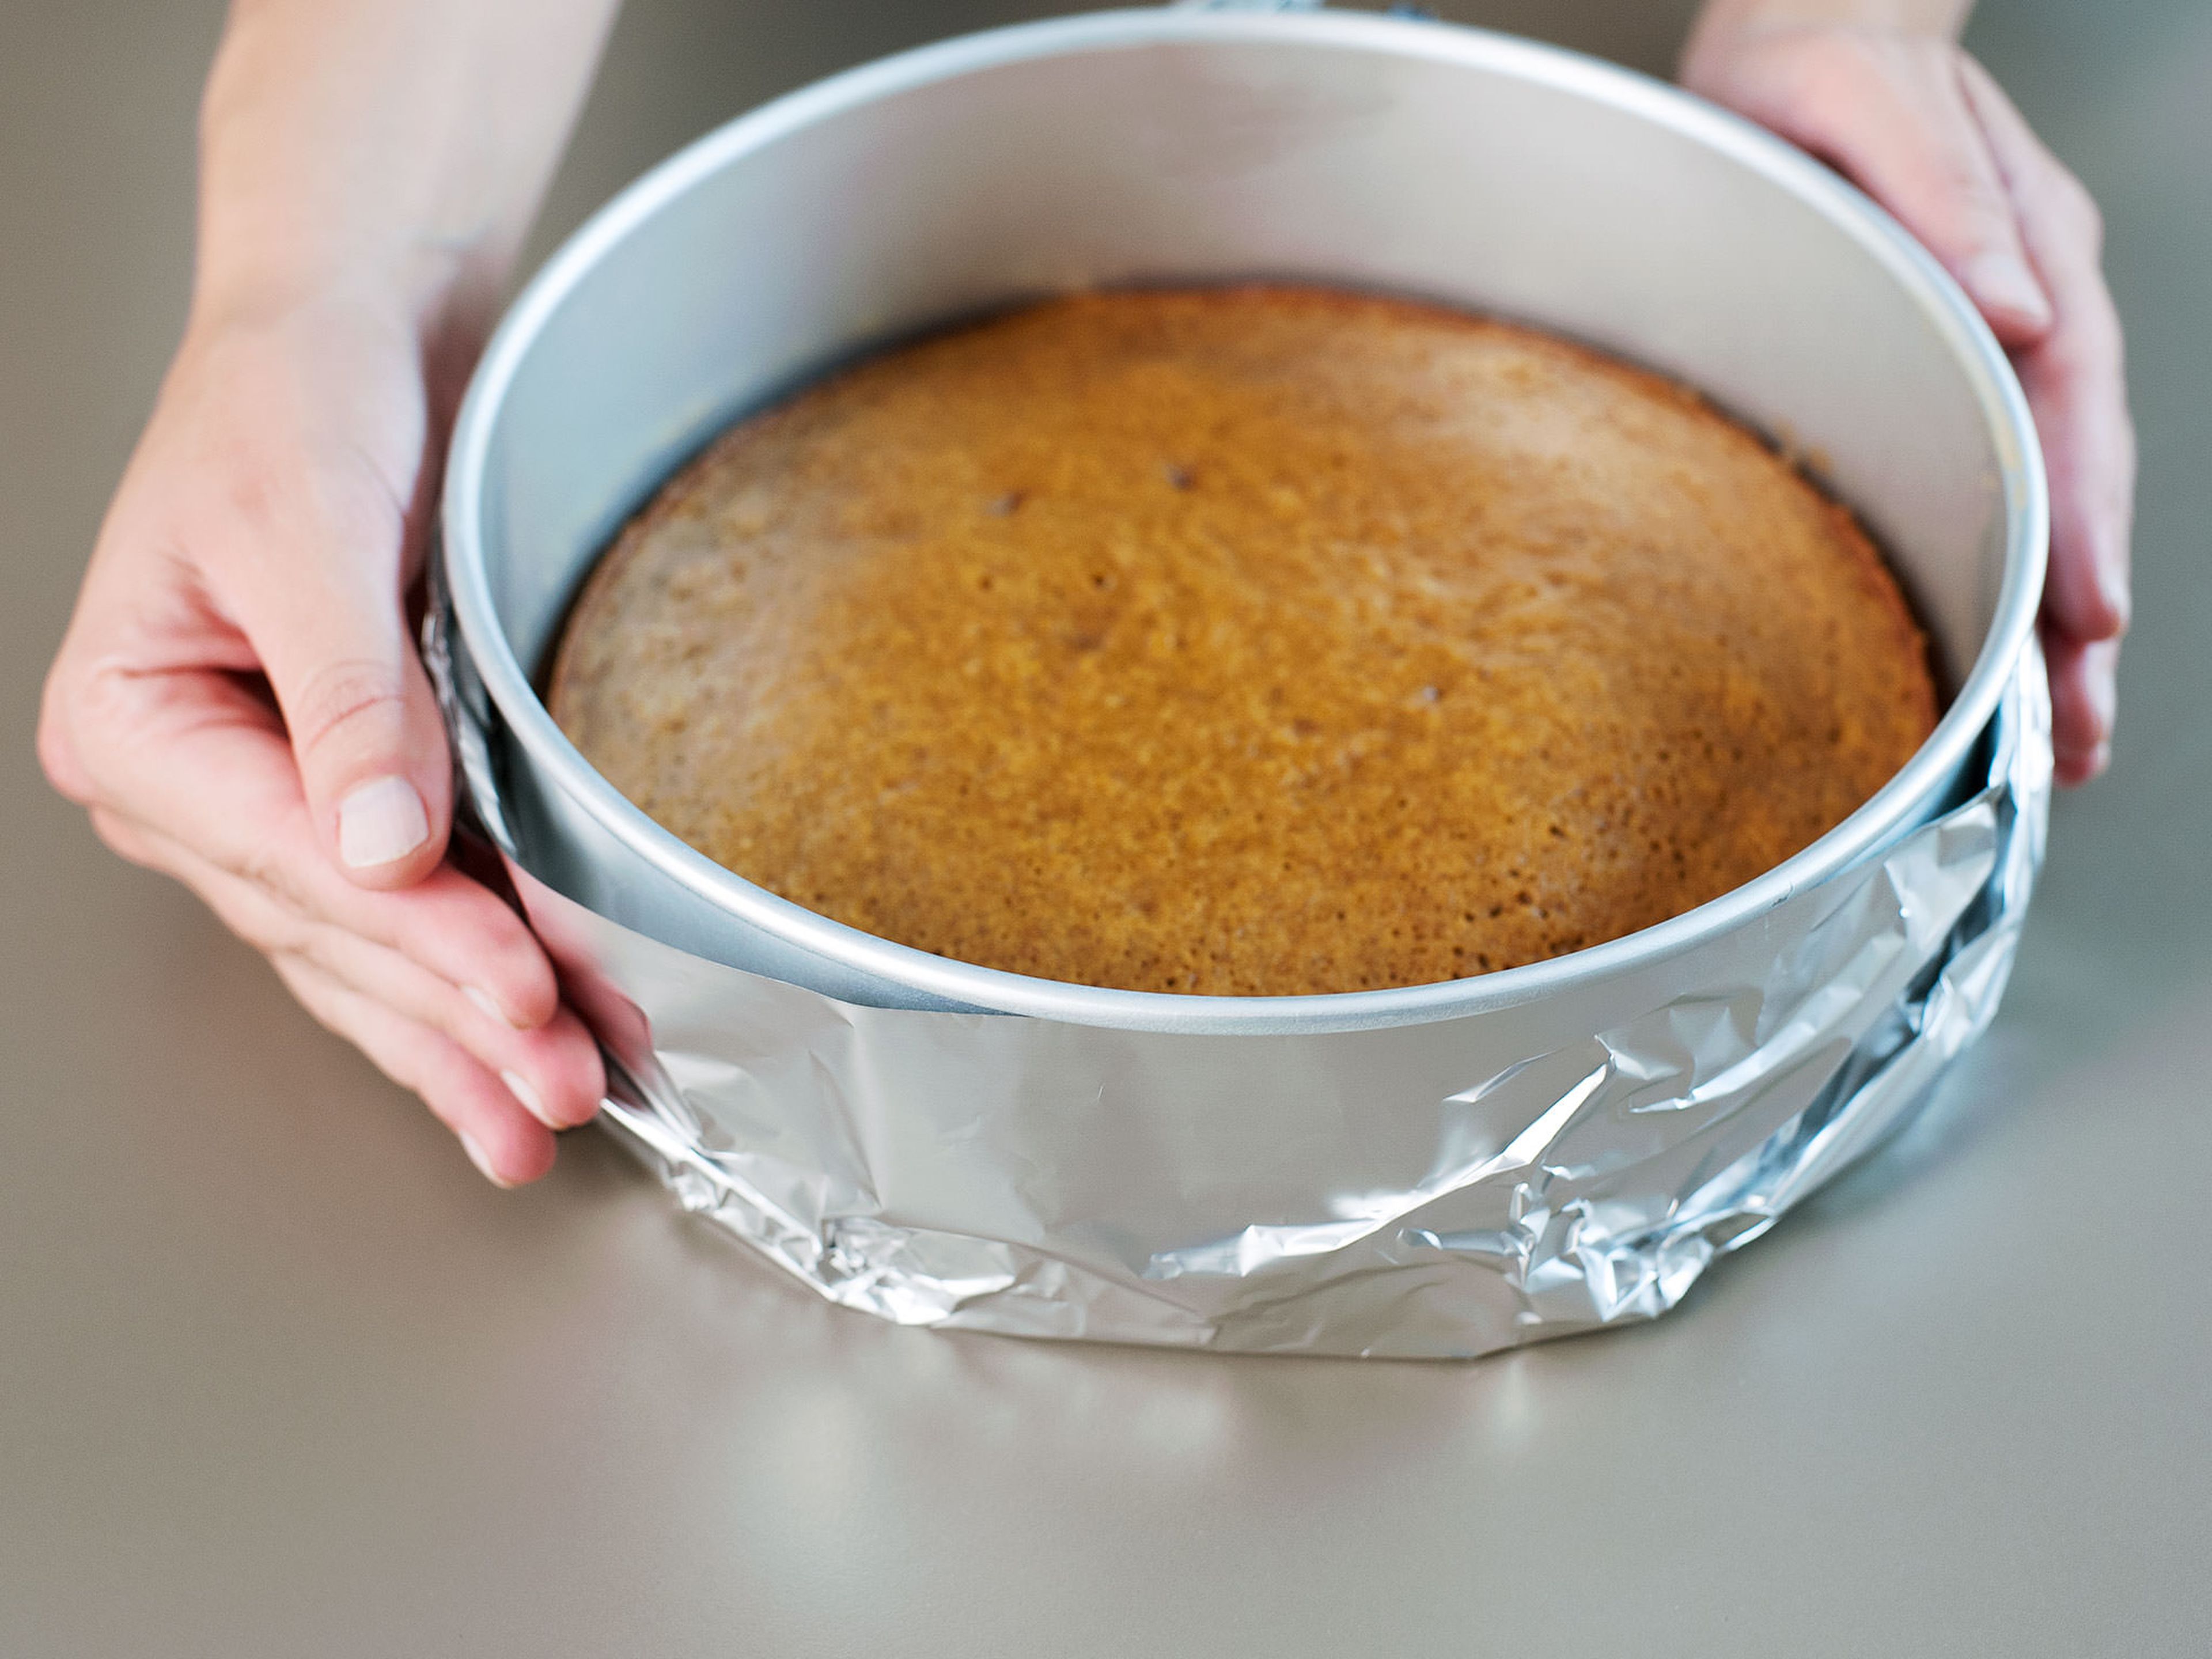 Wrap the baking form in 2 sheets of aluminum foil. Bring some of the water to a boil. Reduce the oven temperature to 160°C/320°F.